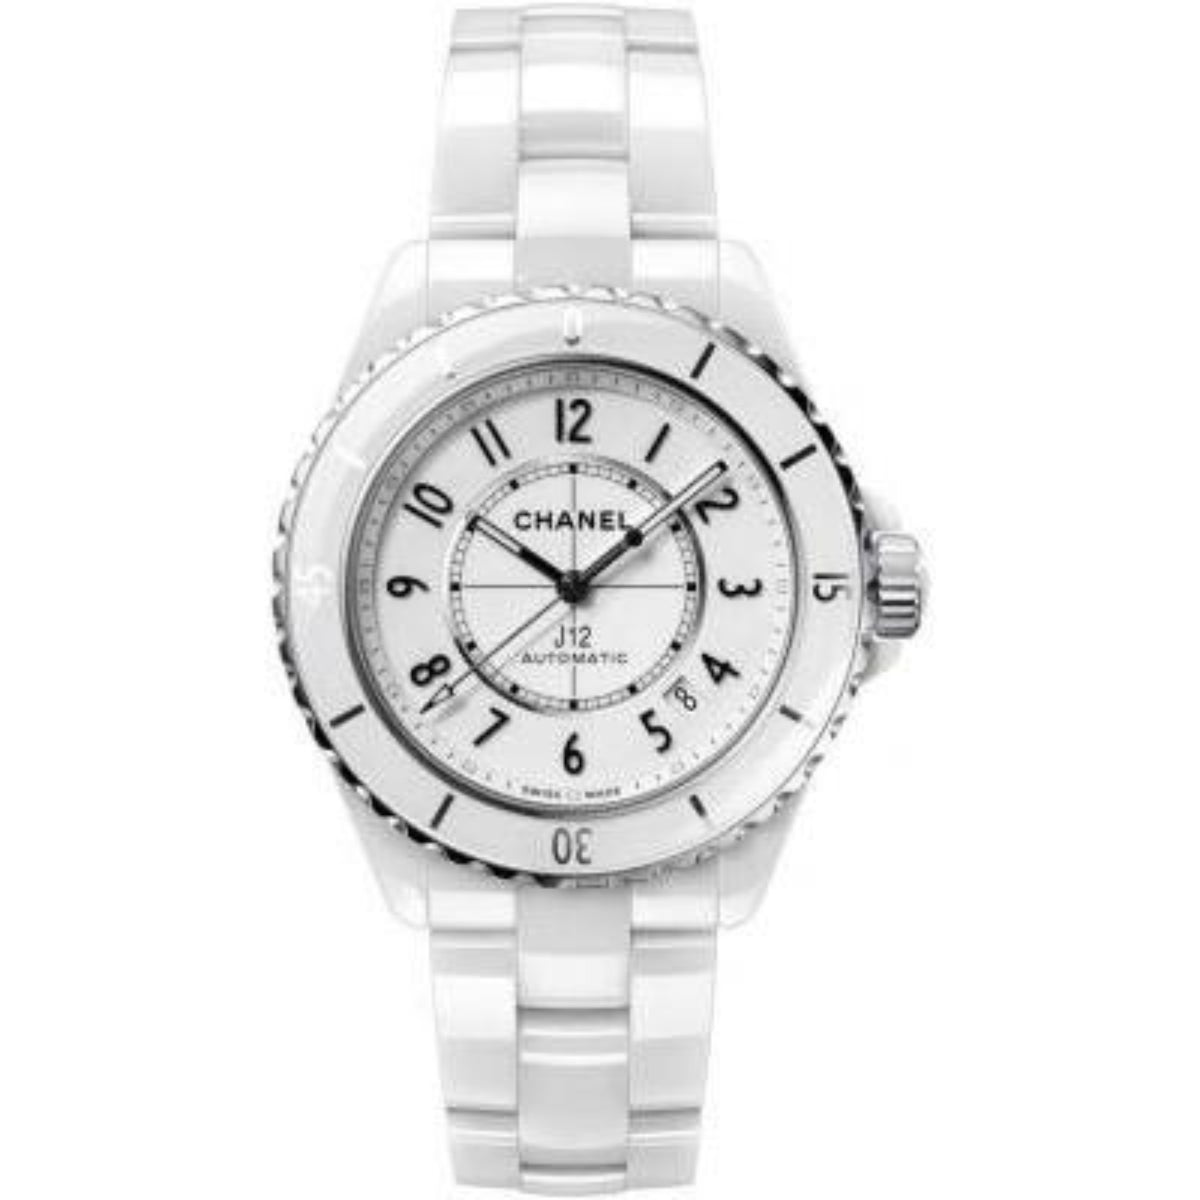 Chanel J12 Automatic Watch Ceramic and White Gold with for